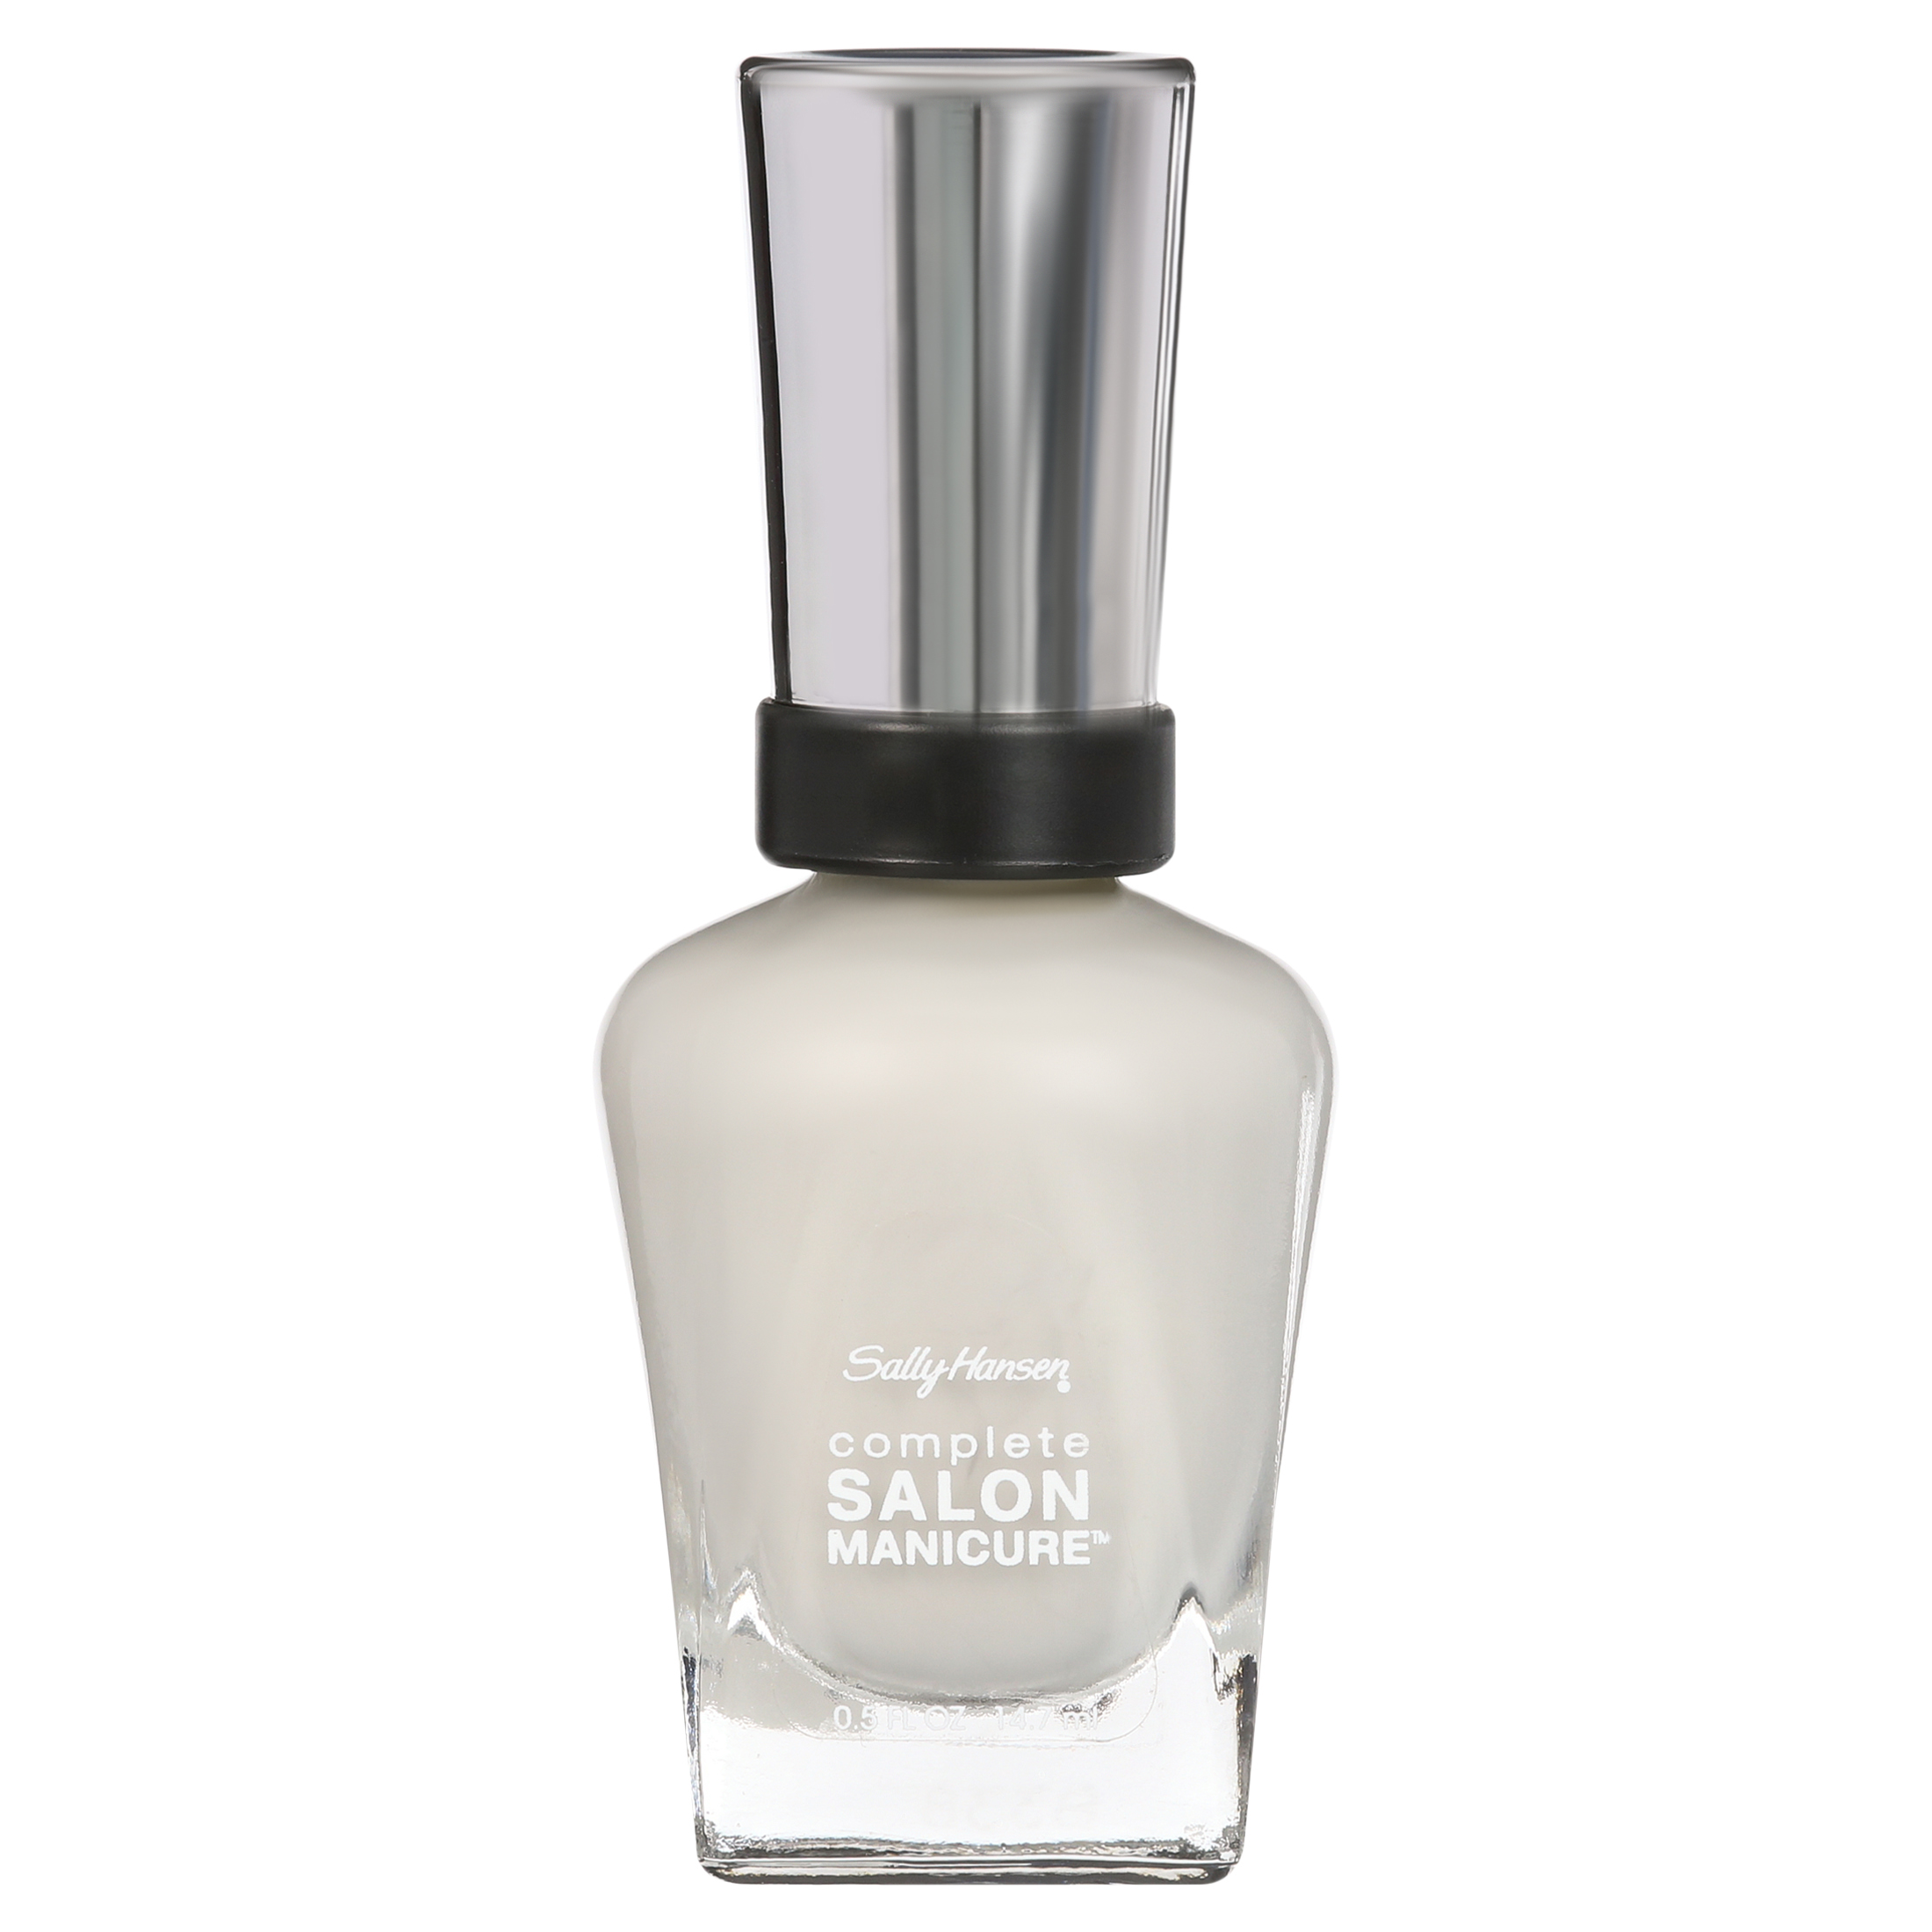 Sally Hansen Complete Salon Manicure Nail Color, All Grey All Night - image 7 of 7